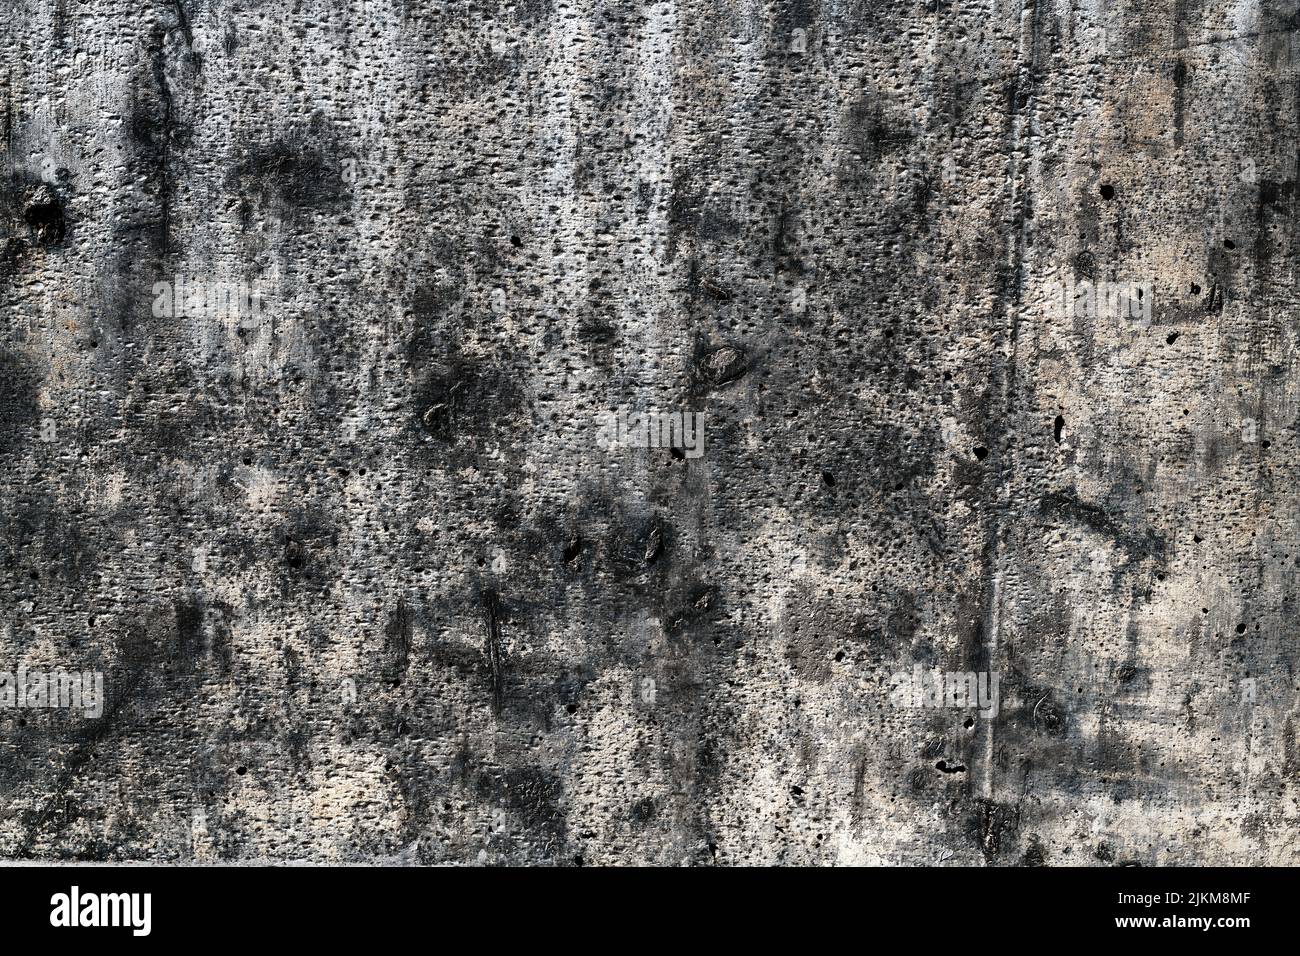 Worn concrete wall surface as grunge texture, graphic design element Stock Photo